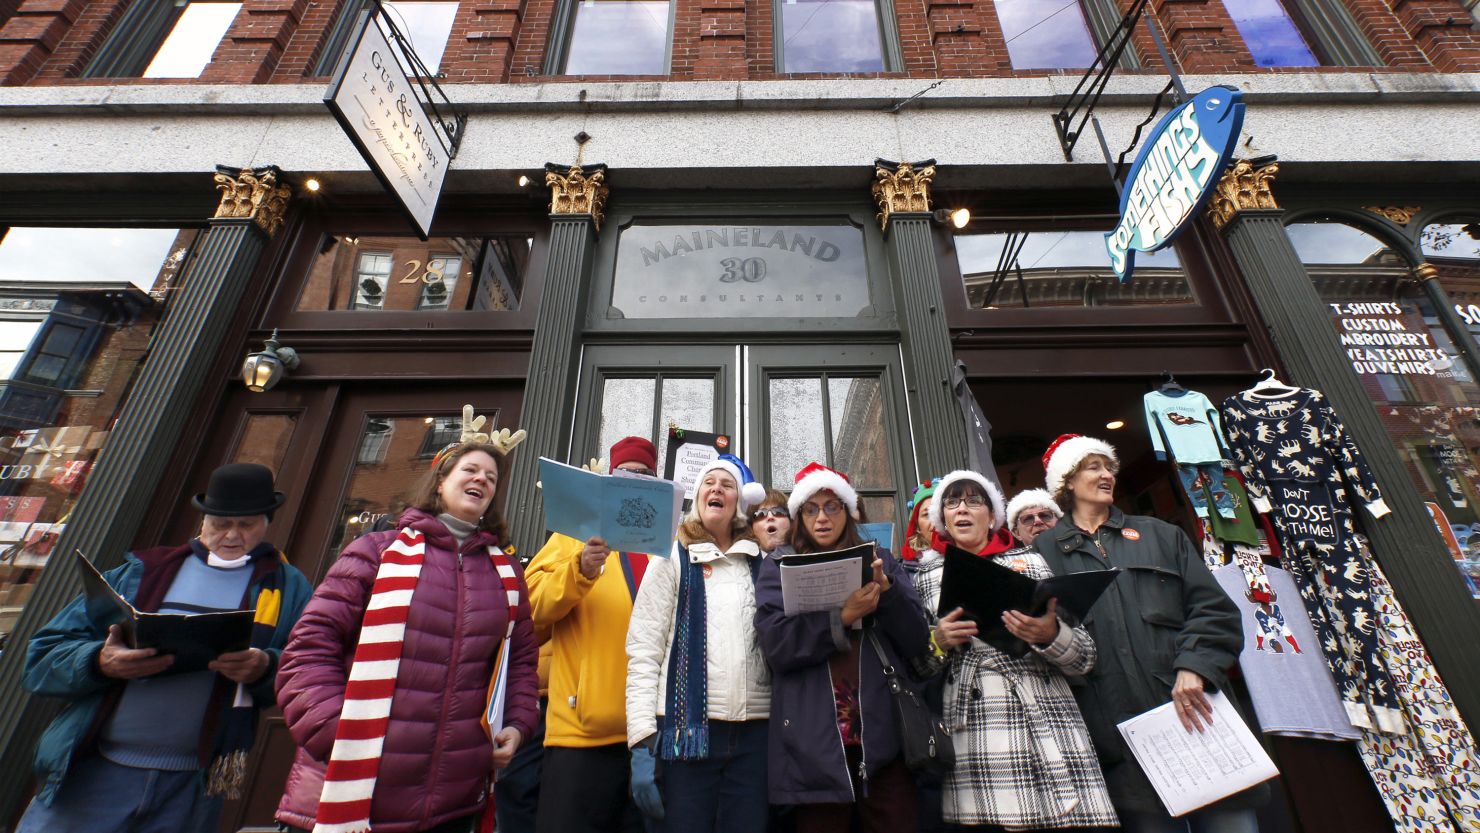 Members of the Portland Community Chorus sing holiday carols in downtown Portland, Maine.